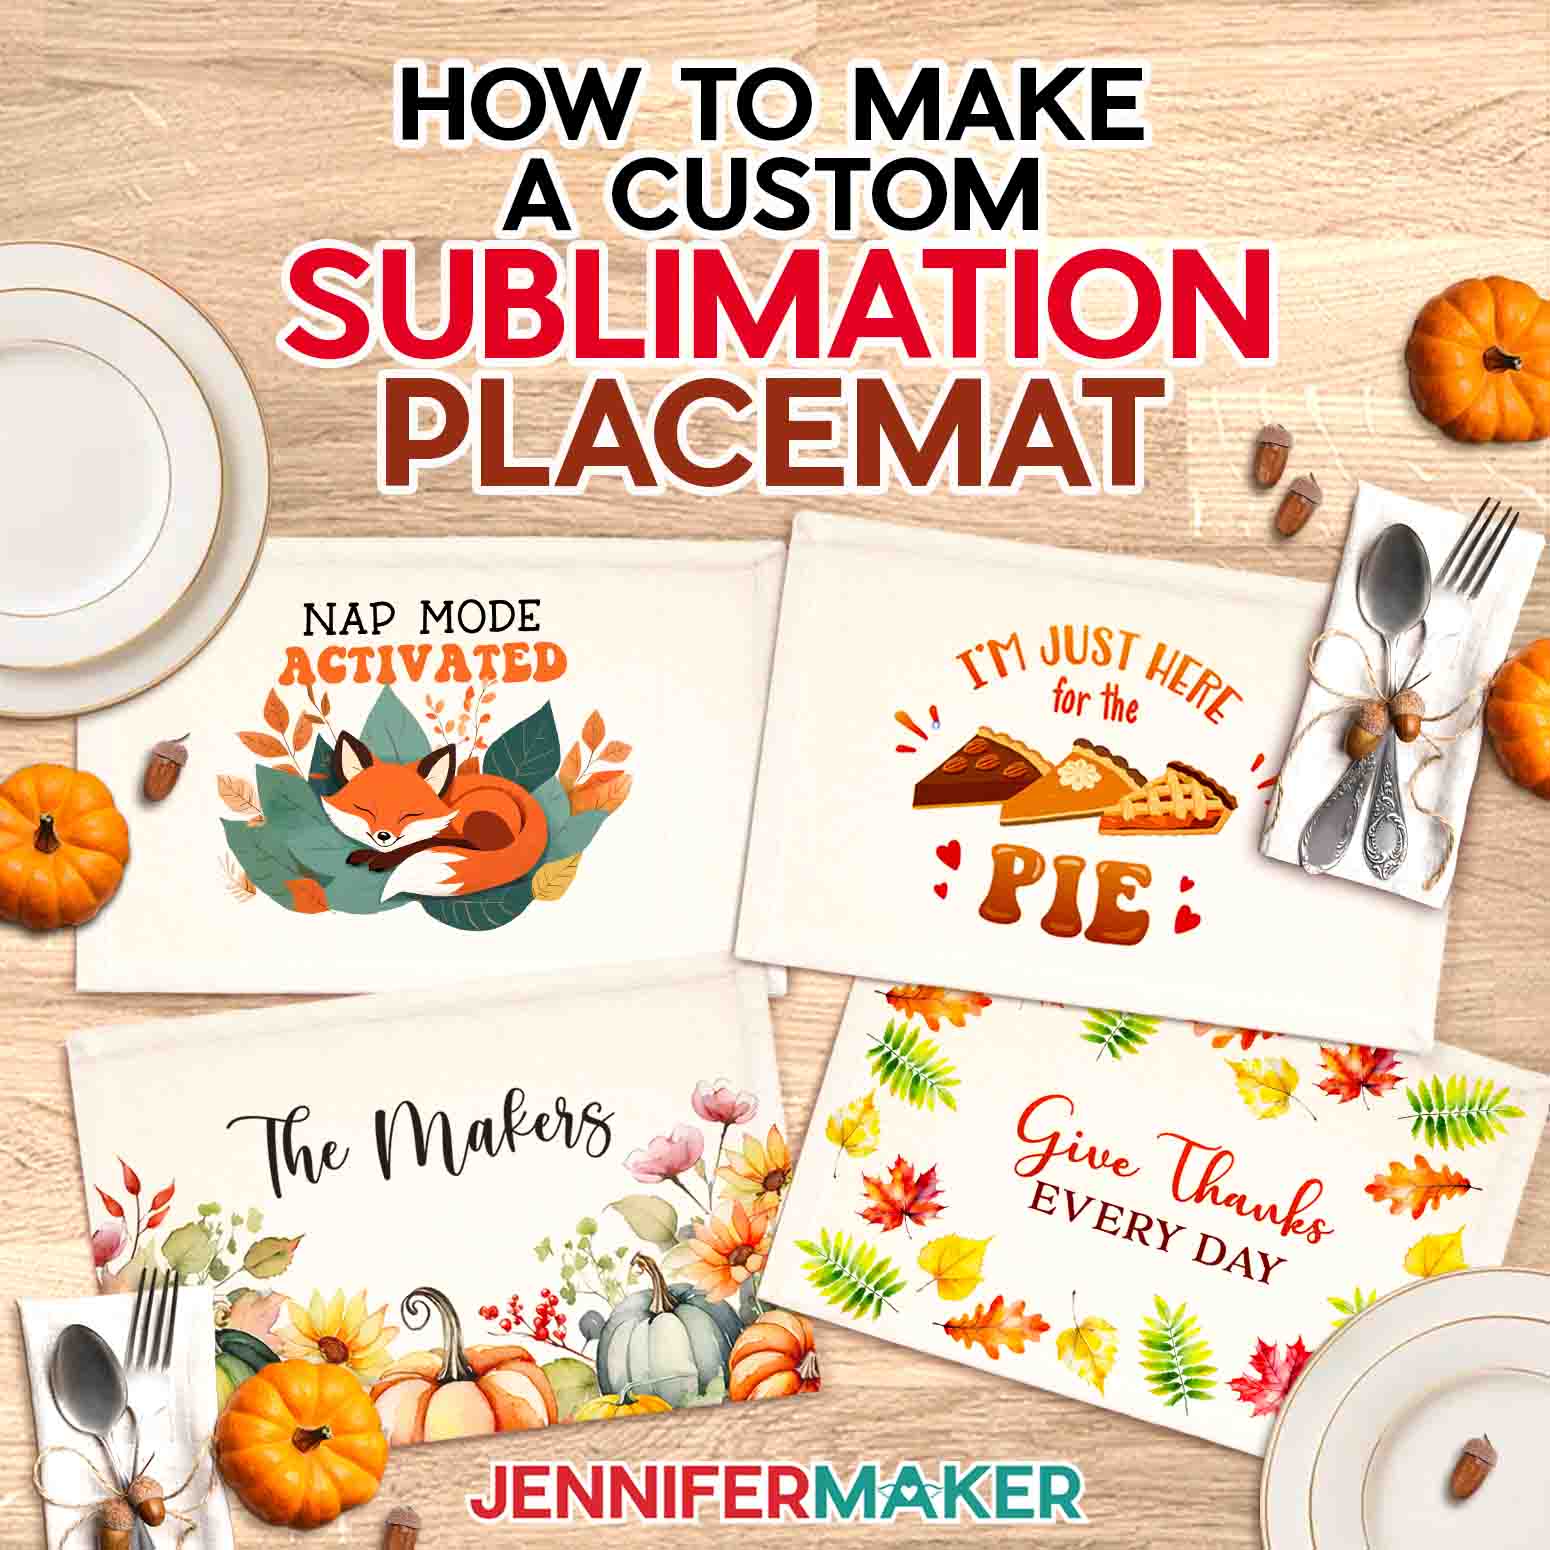 How To Customize A Placemat With Sublimation For Thanksgiving